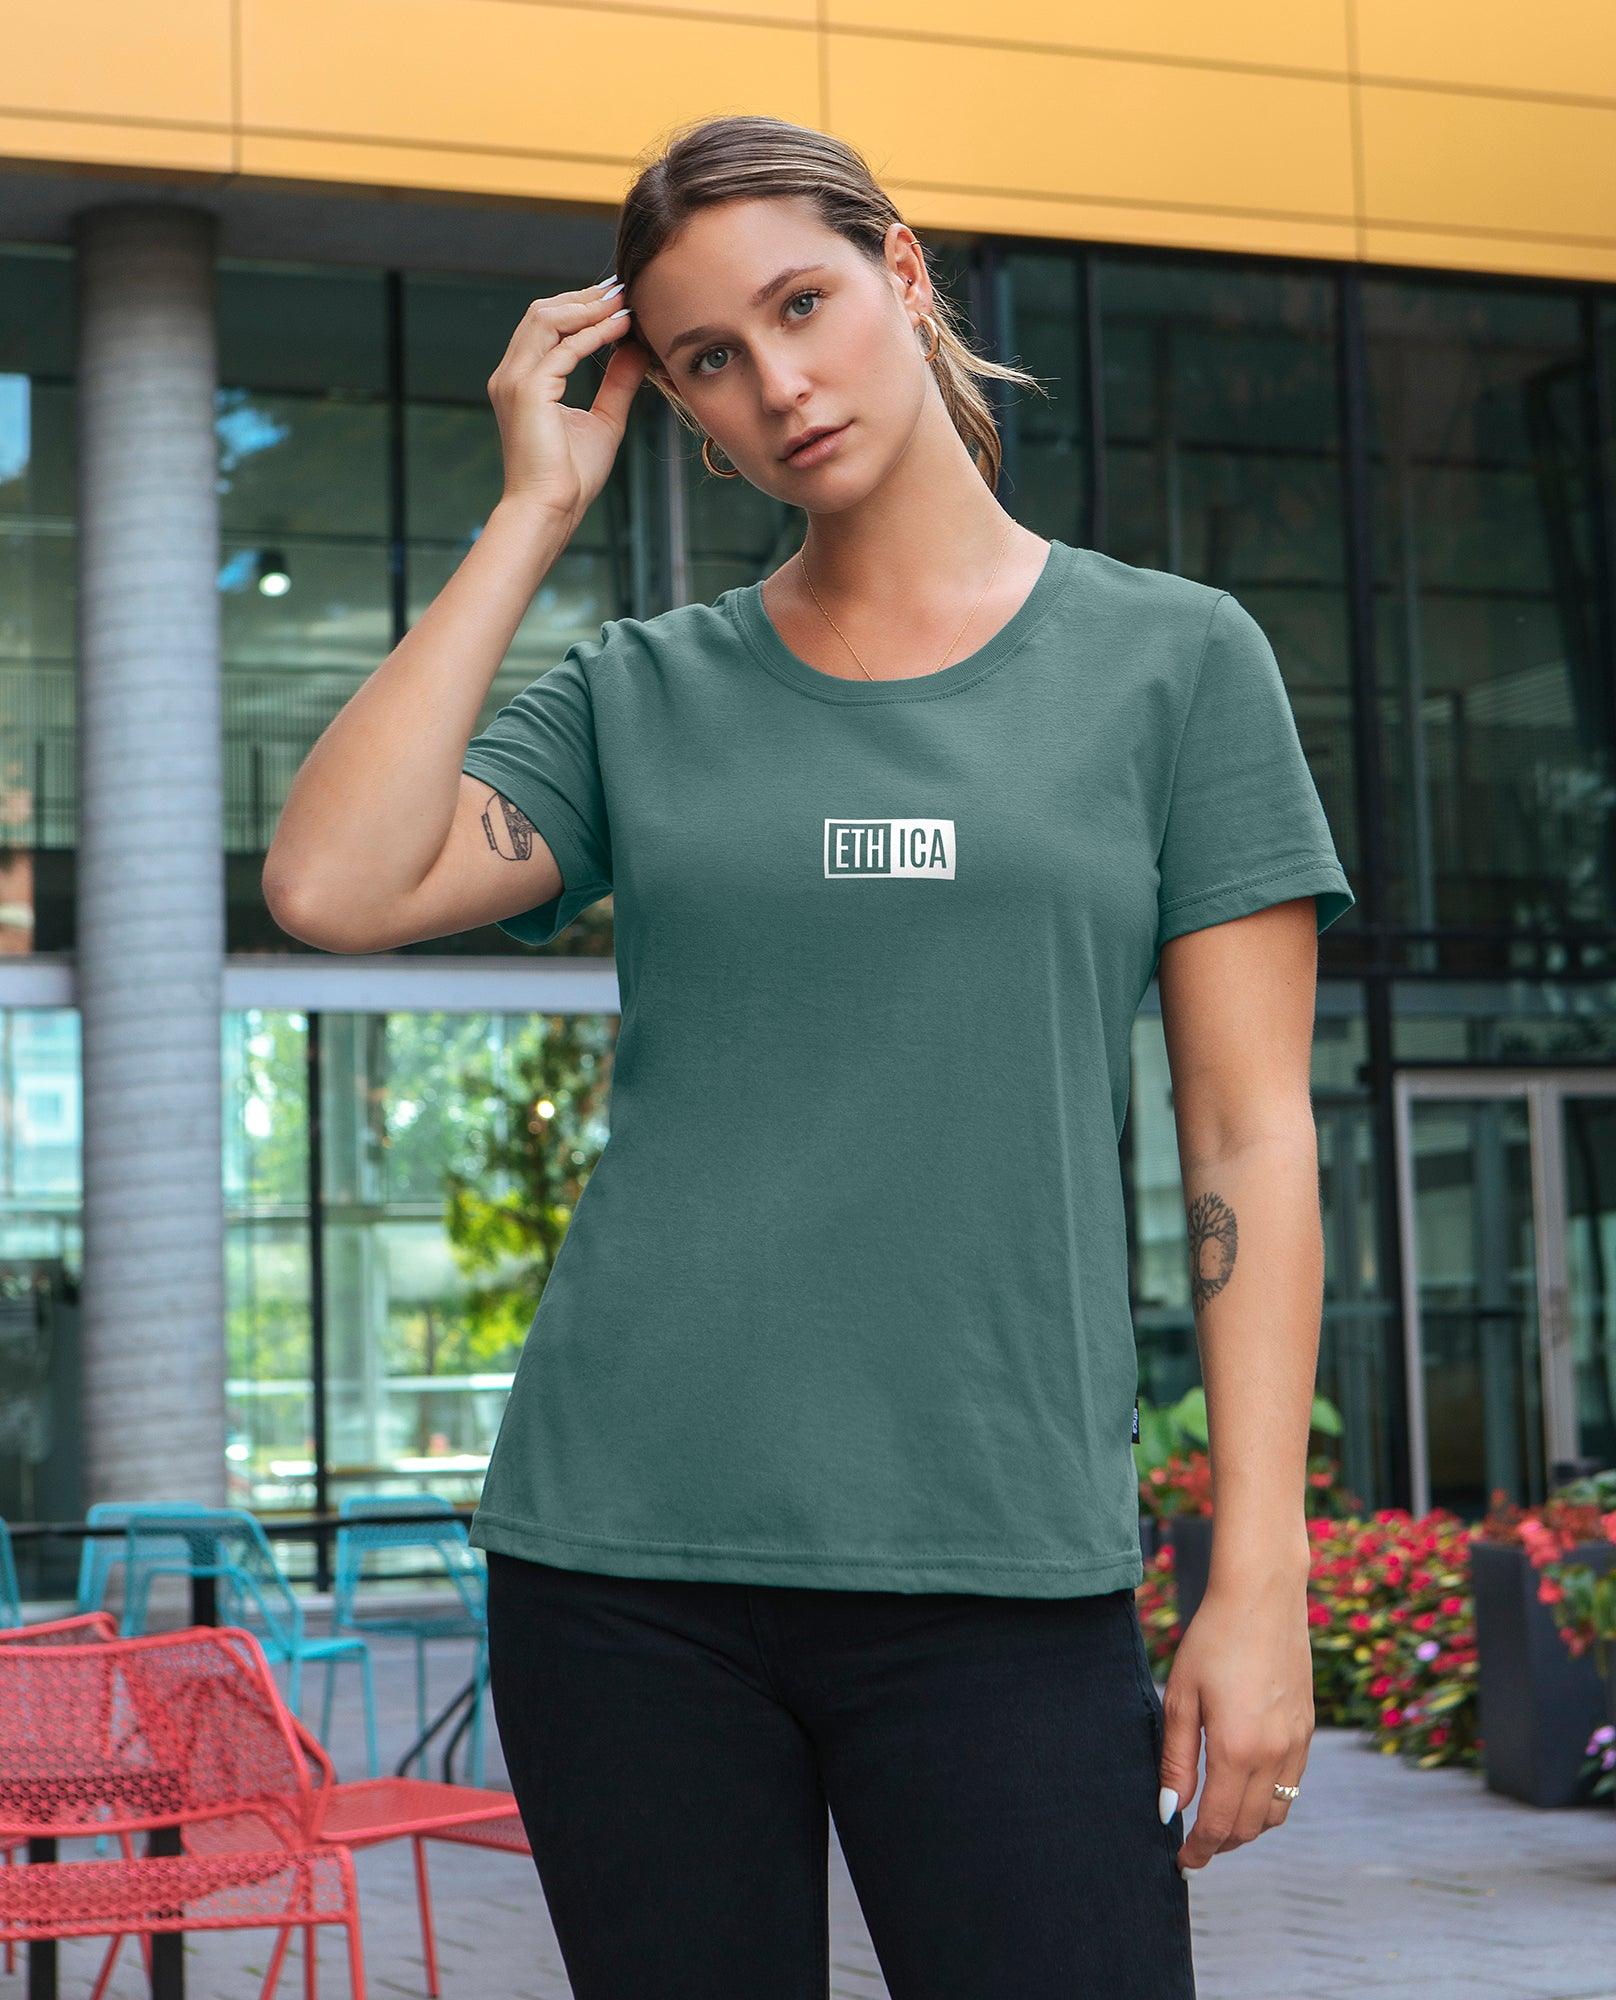 100L2YW – Women’s crewneck t-shirt - Colortex Screen Printing & Embroidery